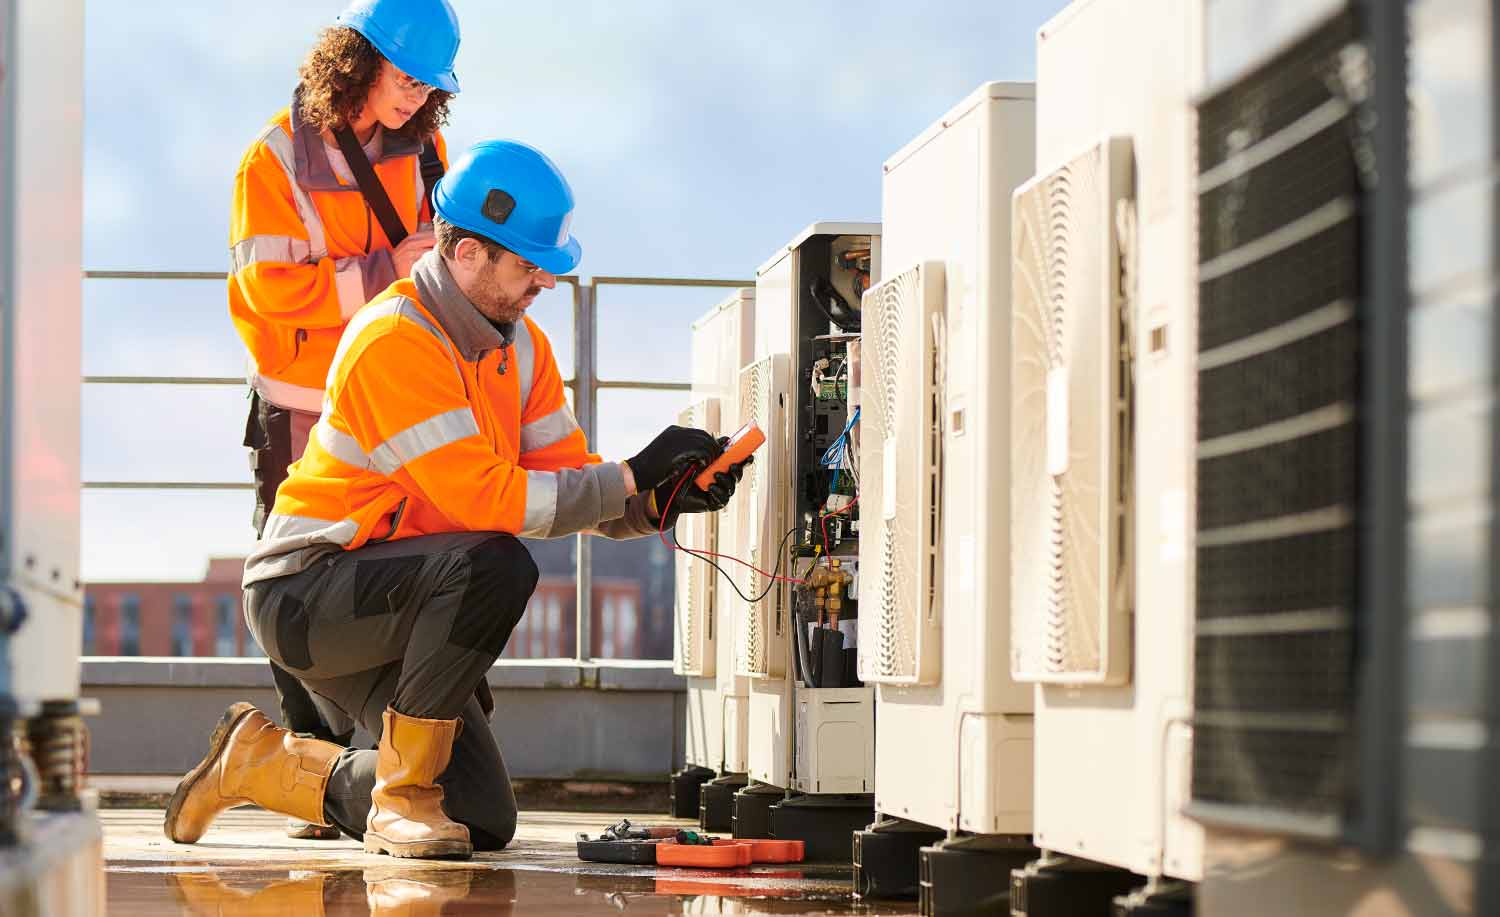 HVAC operators working without interruption thanks to their HVAC answering service